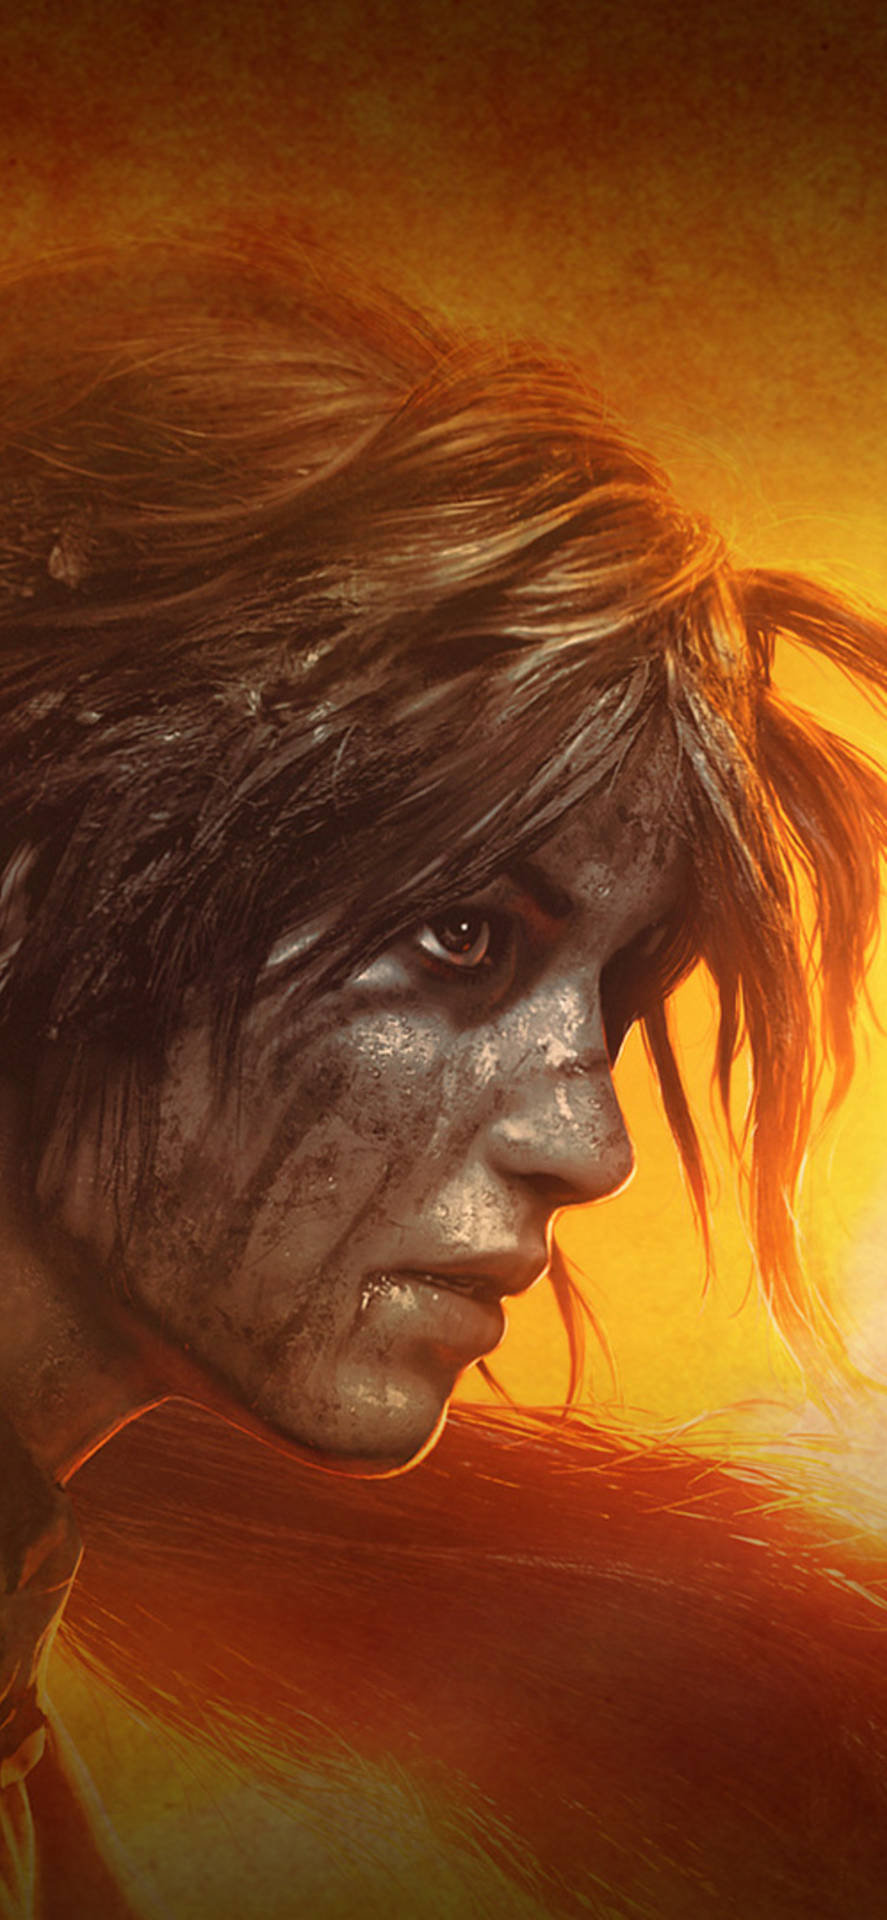 Experience adventures anytime with the Lara Croft Iphone Wallpaper